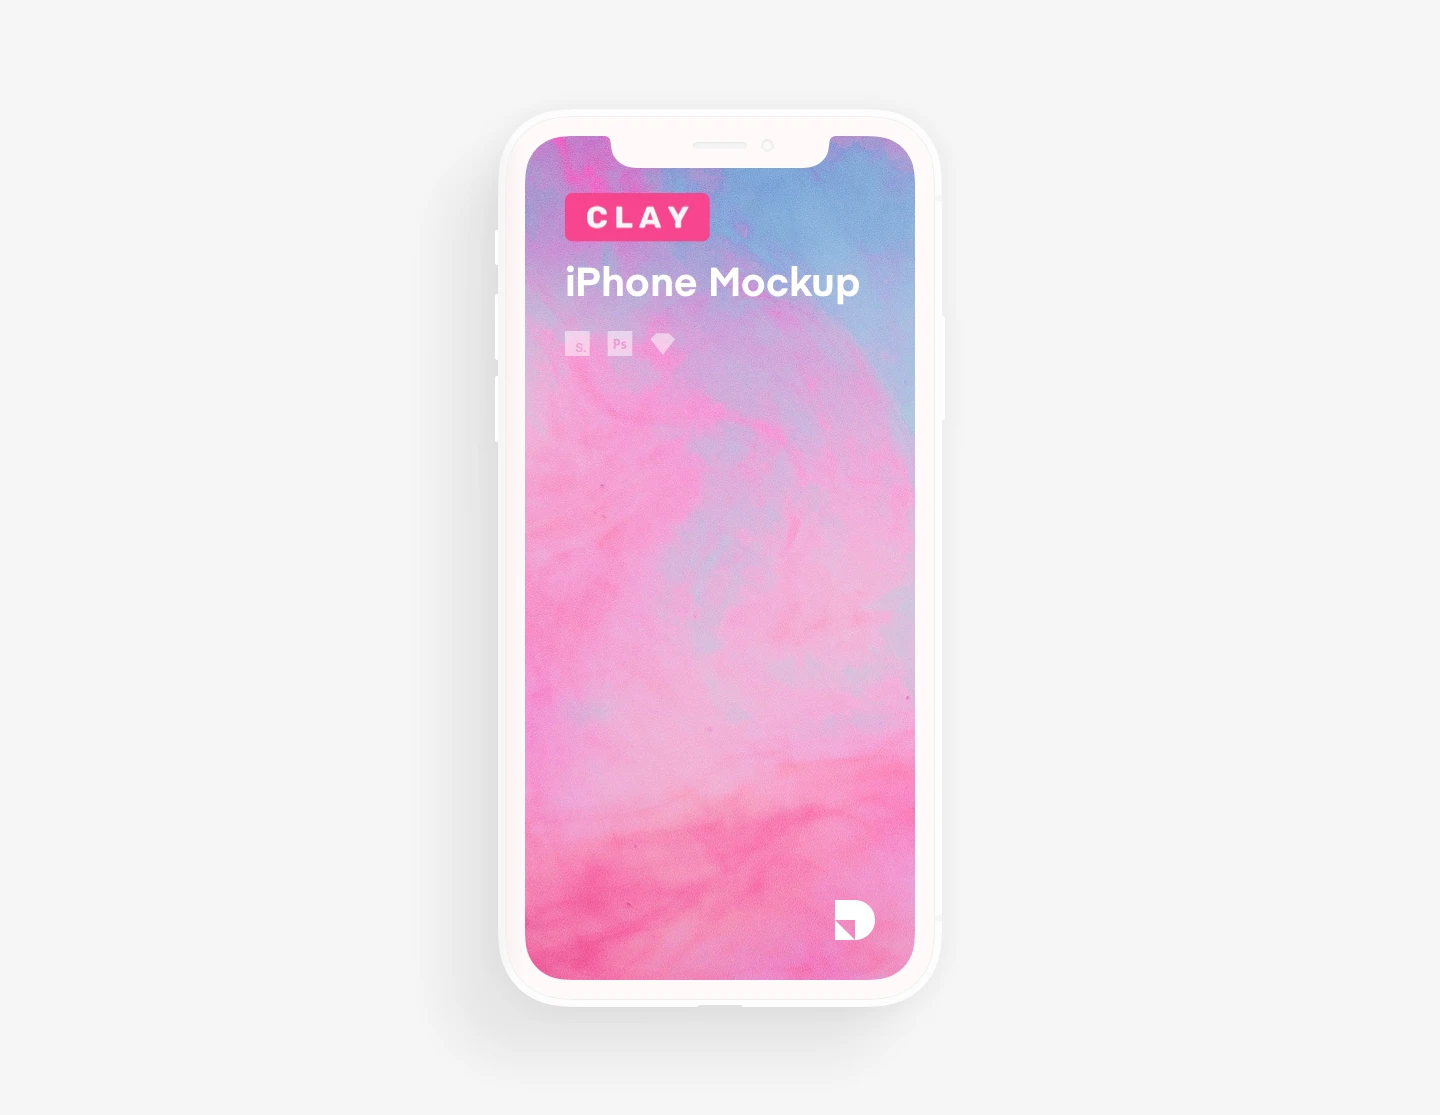 Clay — A free minimalist mockup kit - A free minimalist mockup kit for Apple devices. Start showing off your design